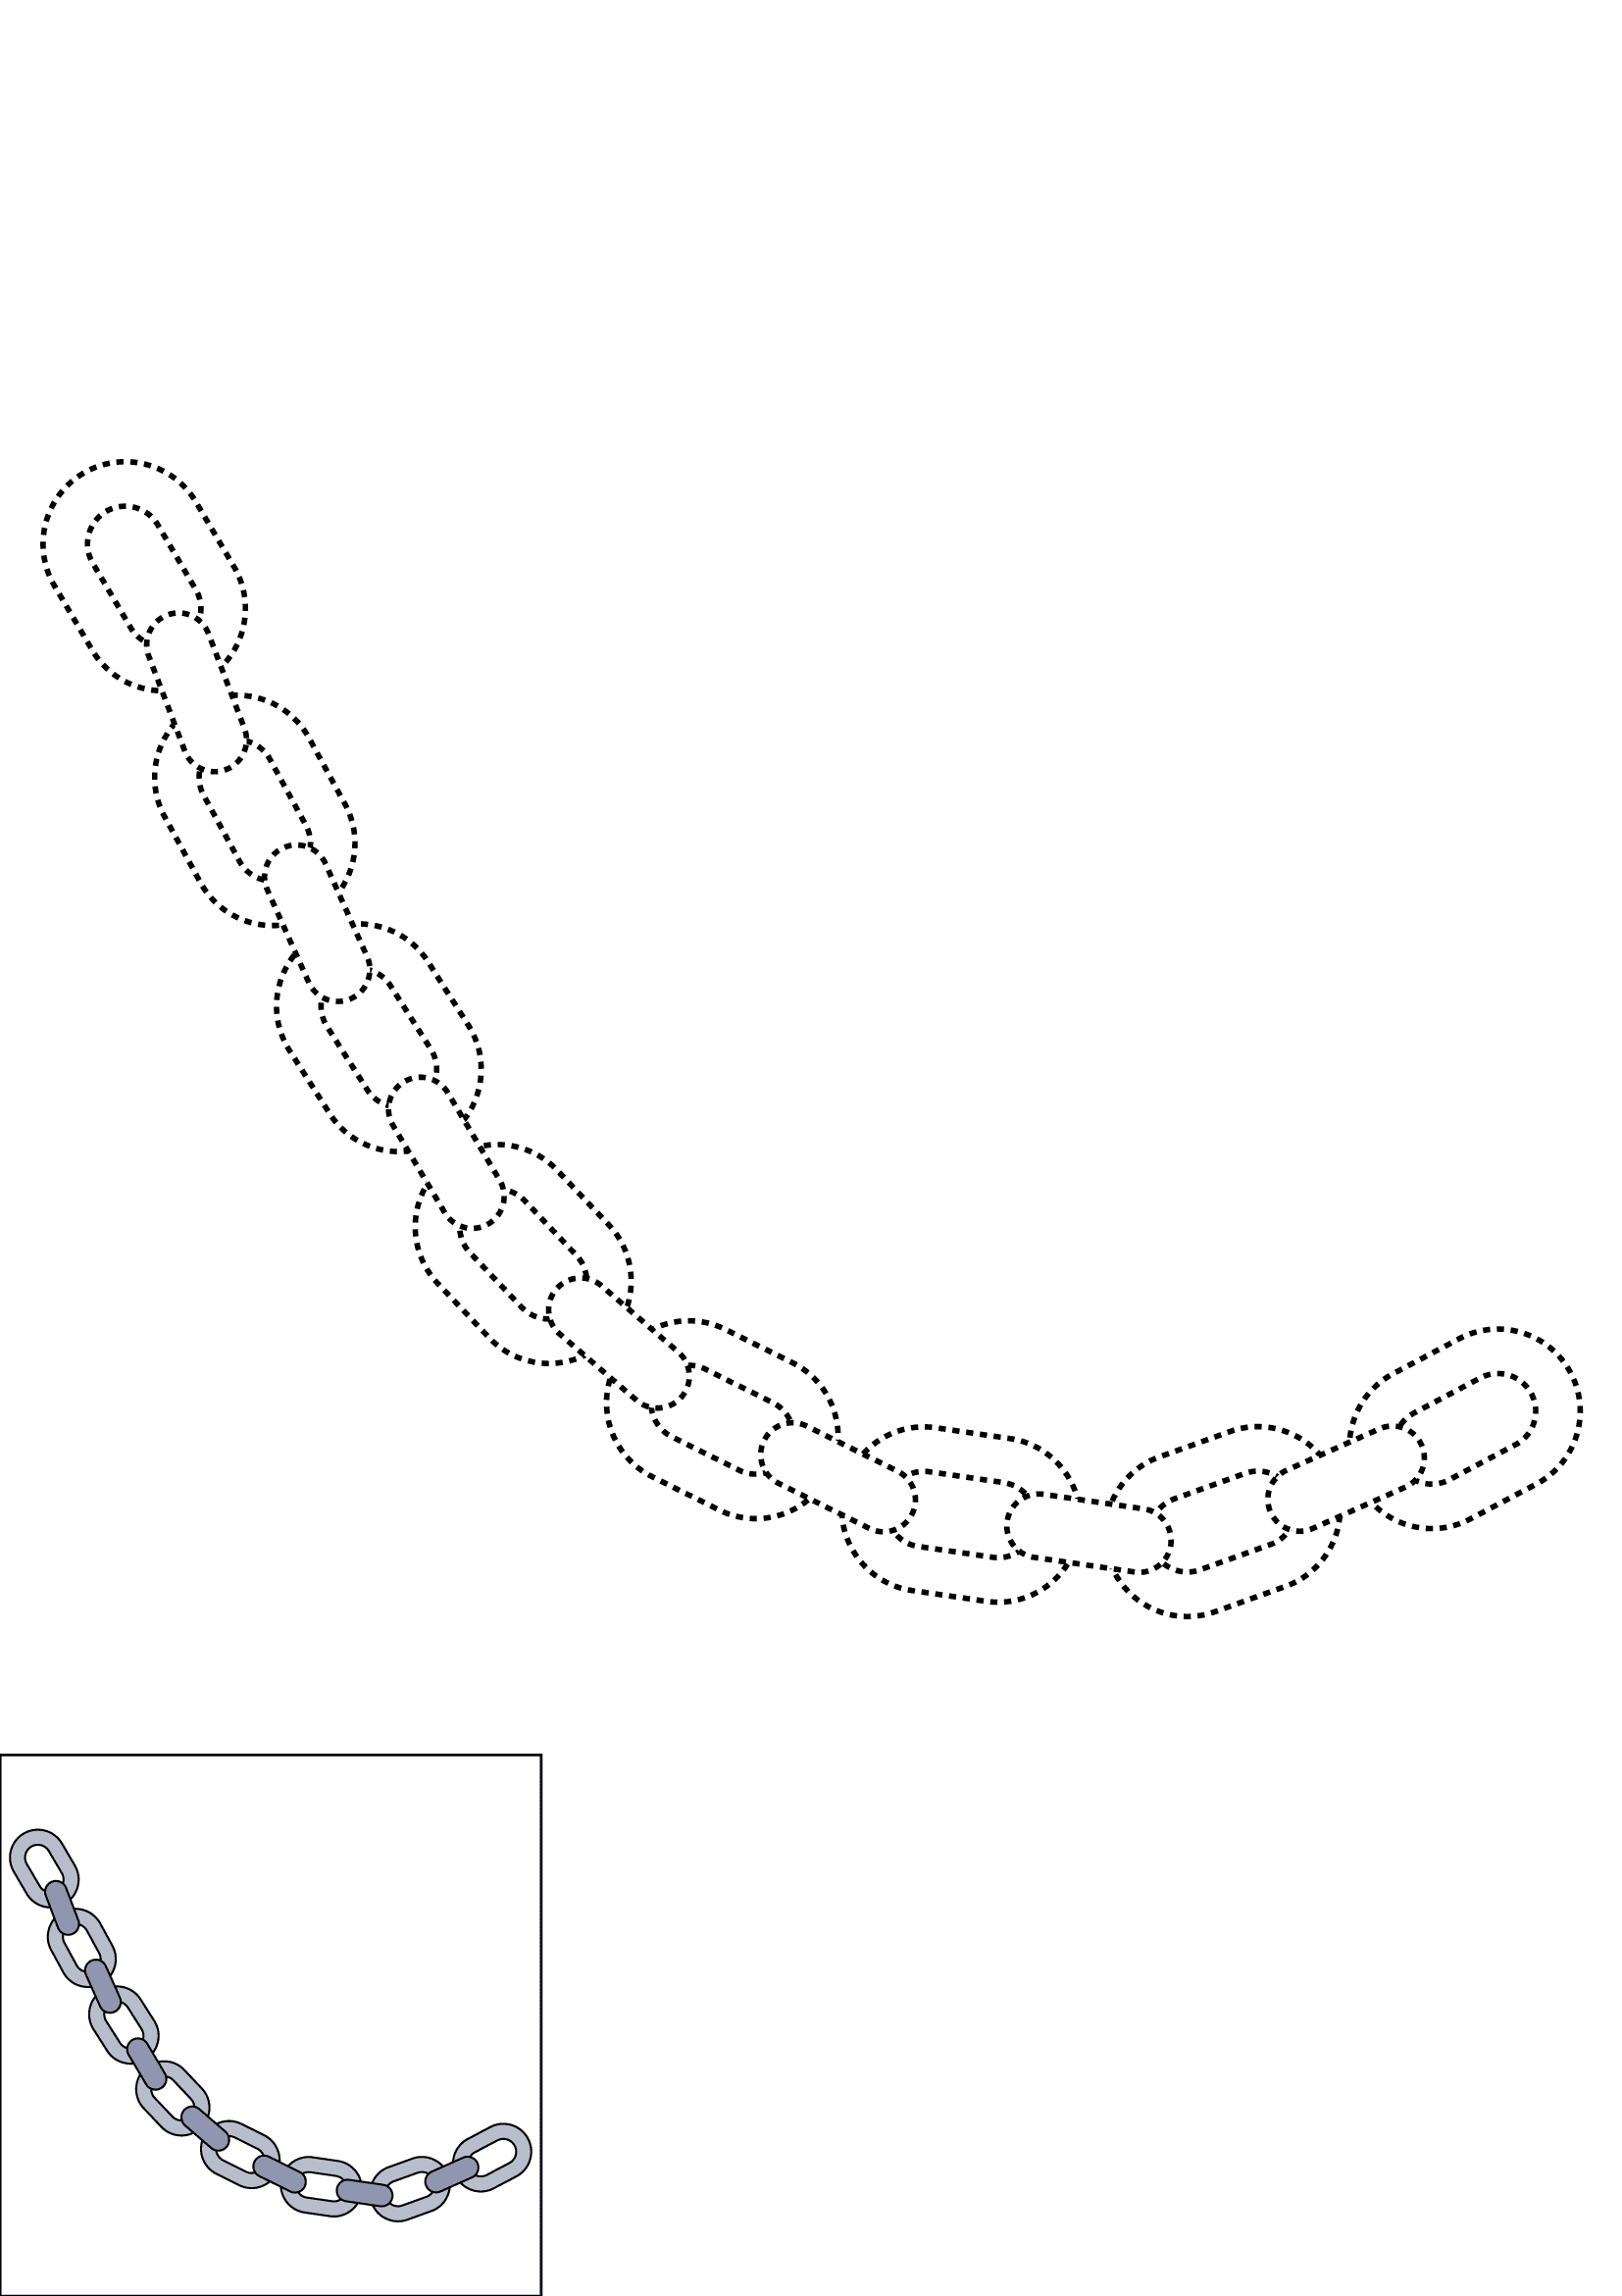 How to Draw A Chain Step by Step Printable Dotted